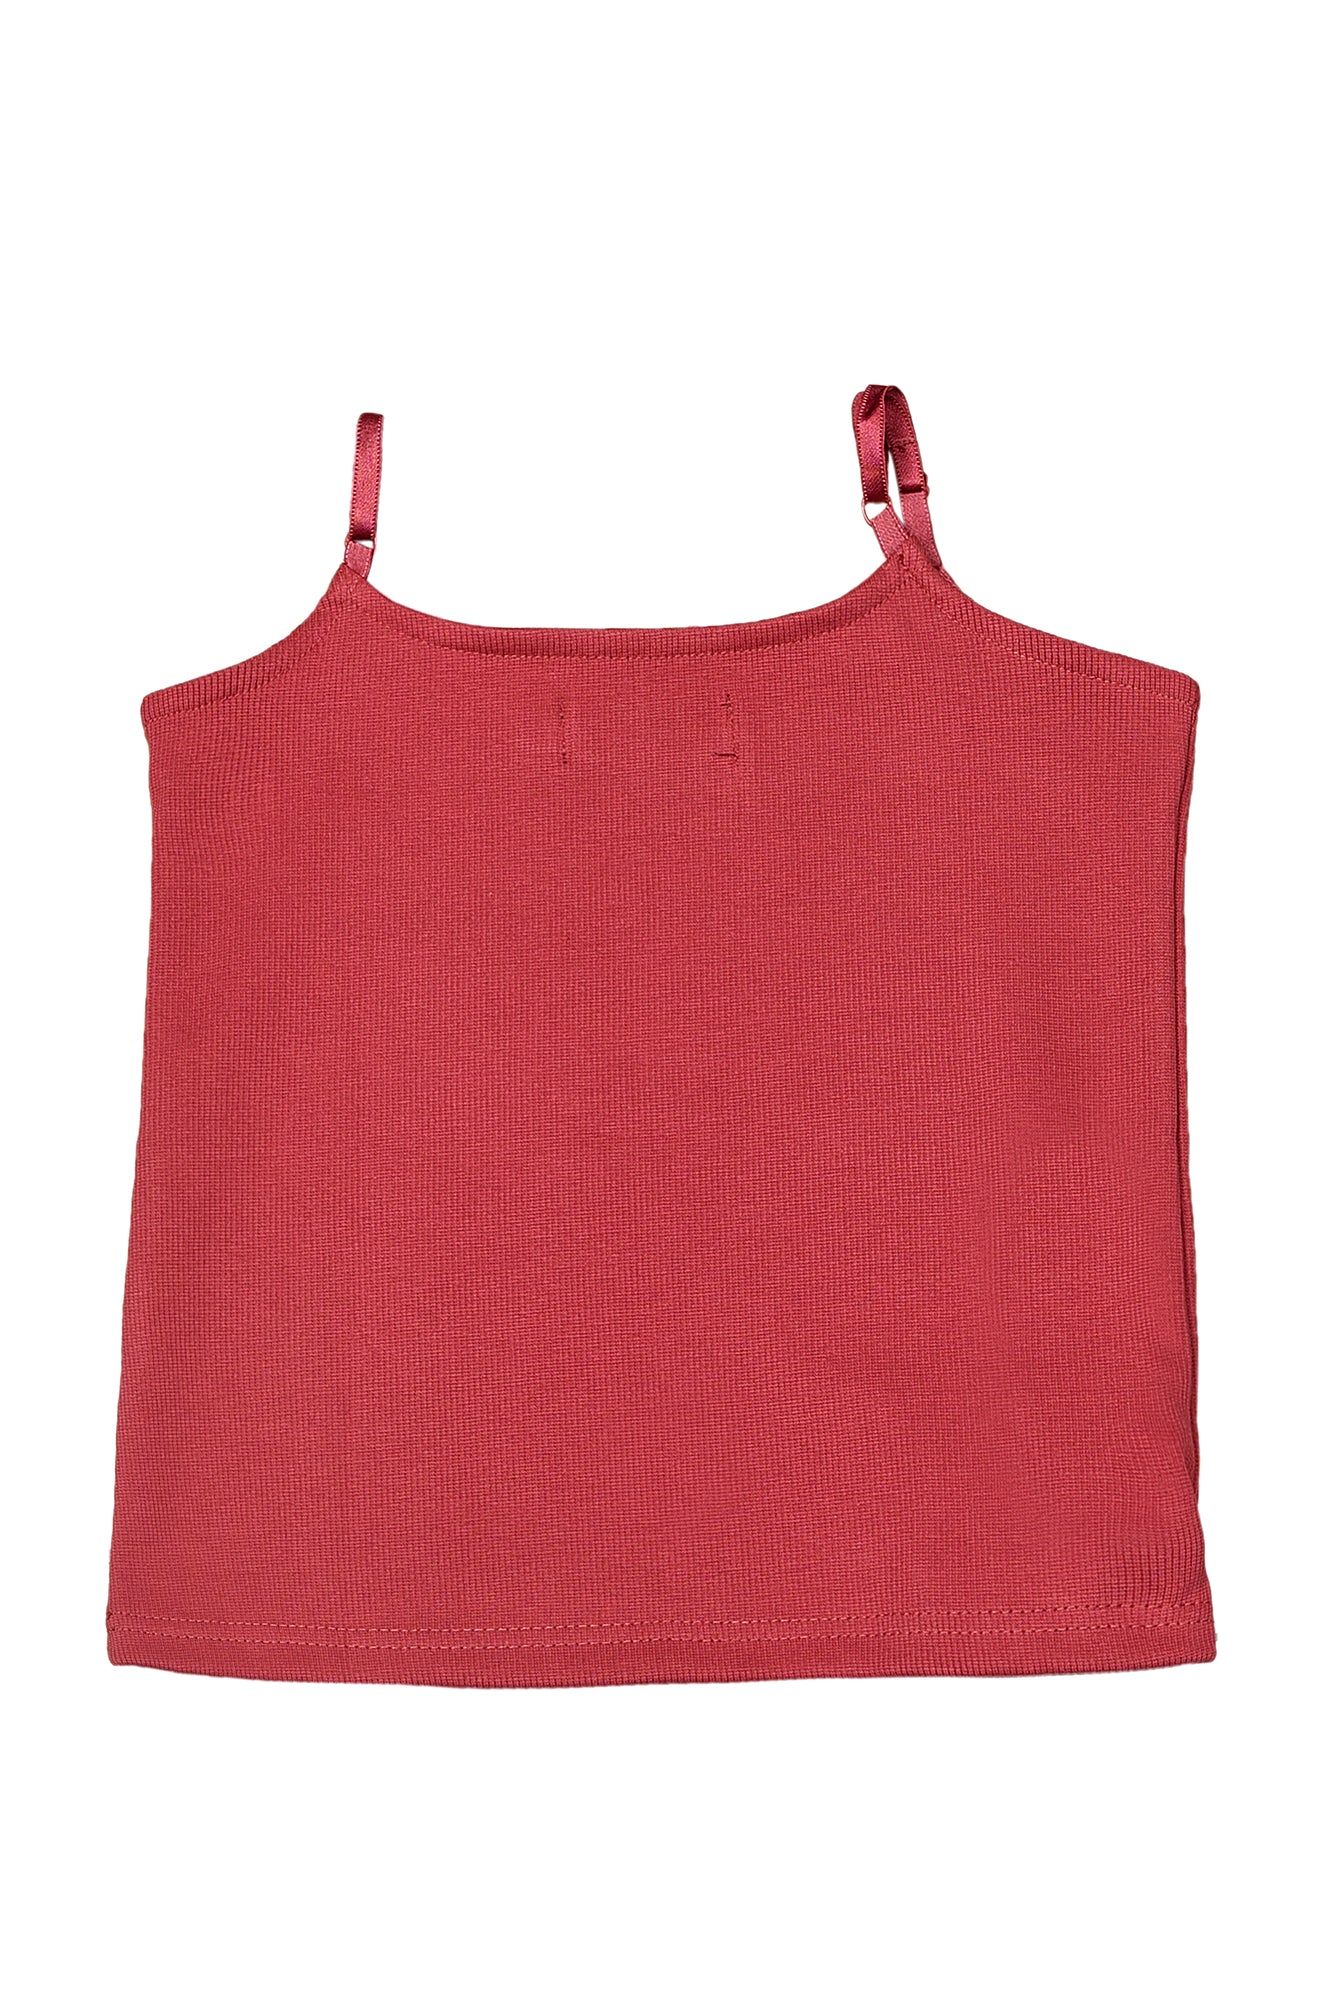 KDS-GC-13062A CAMISOLE RUST